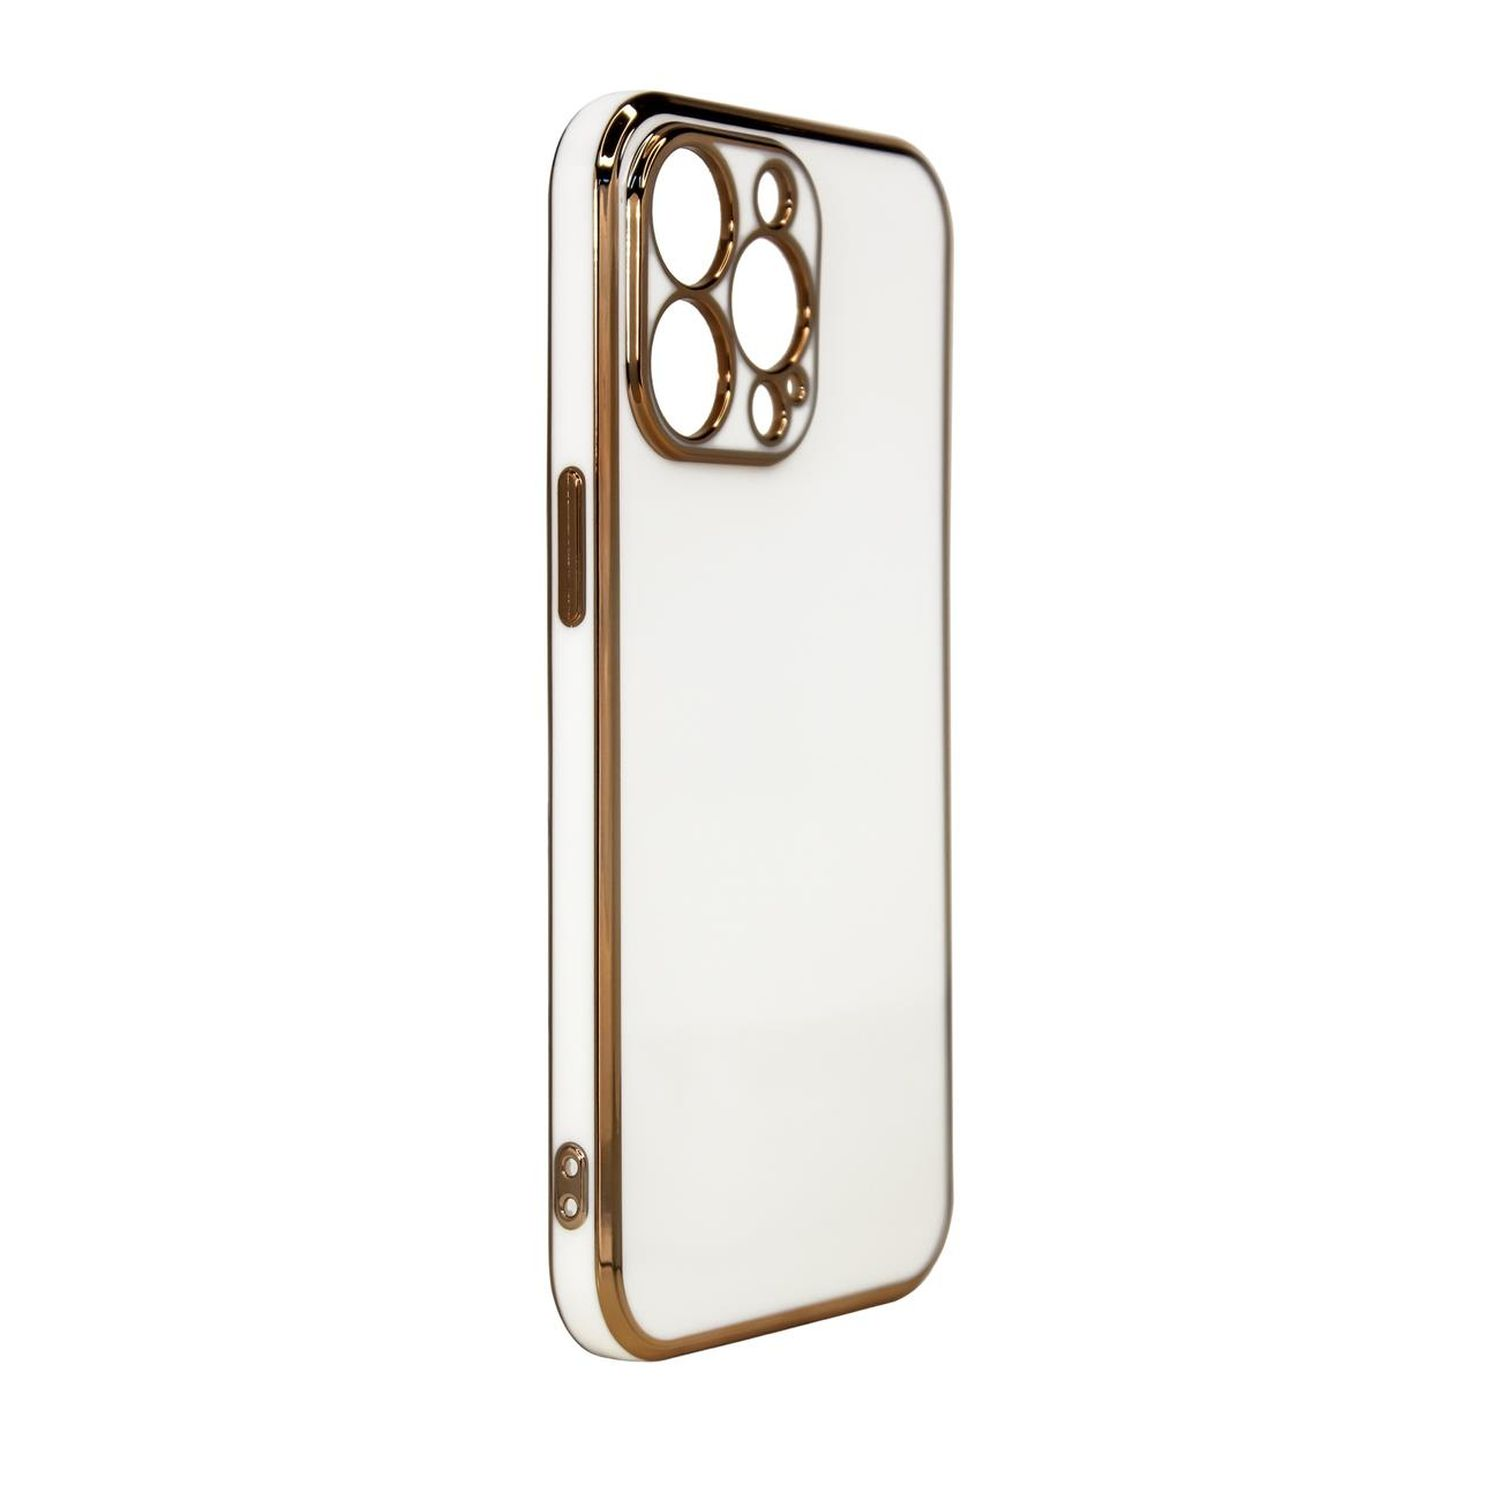 13 Color Lighting Case, iPhone Pro Weiß-Gold Max, COFI Apple, Backcover,